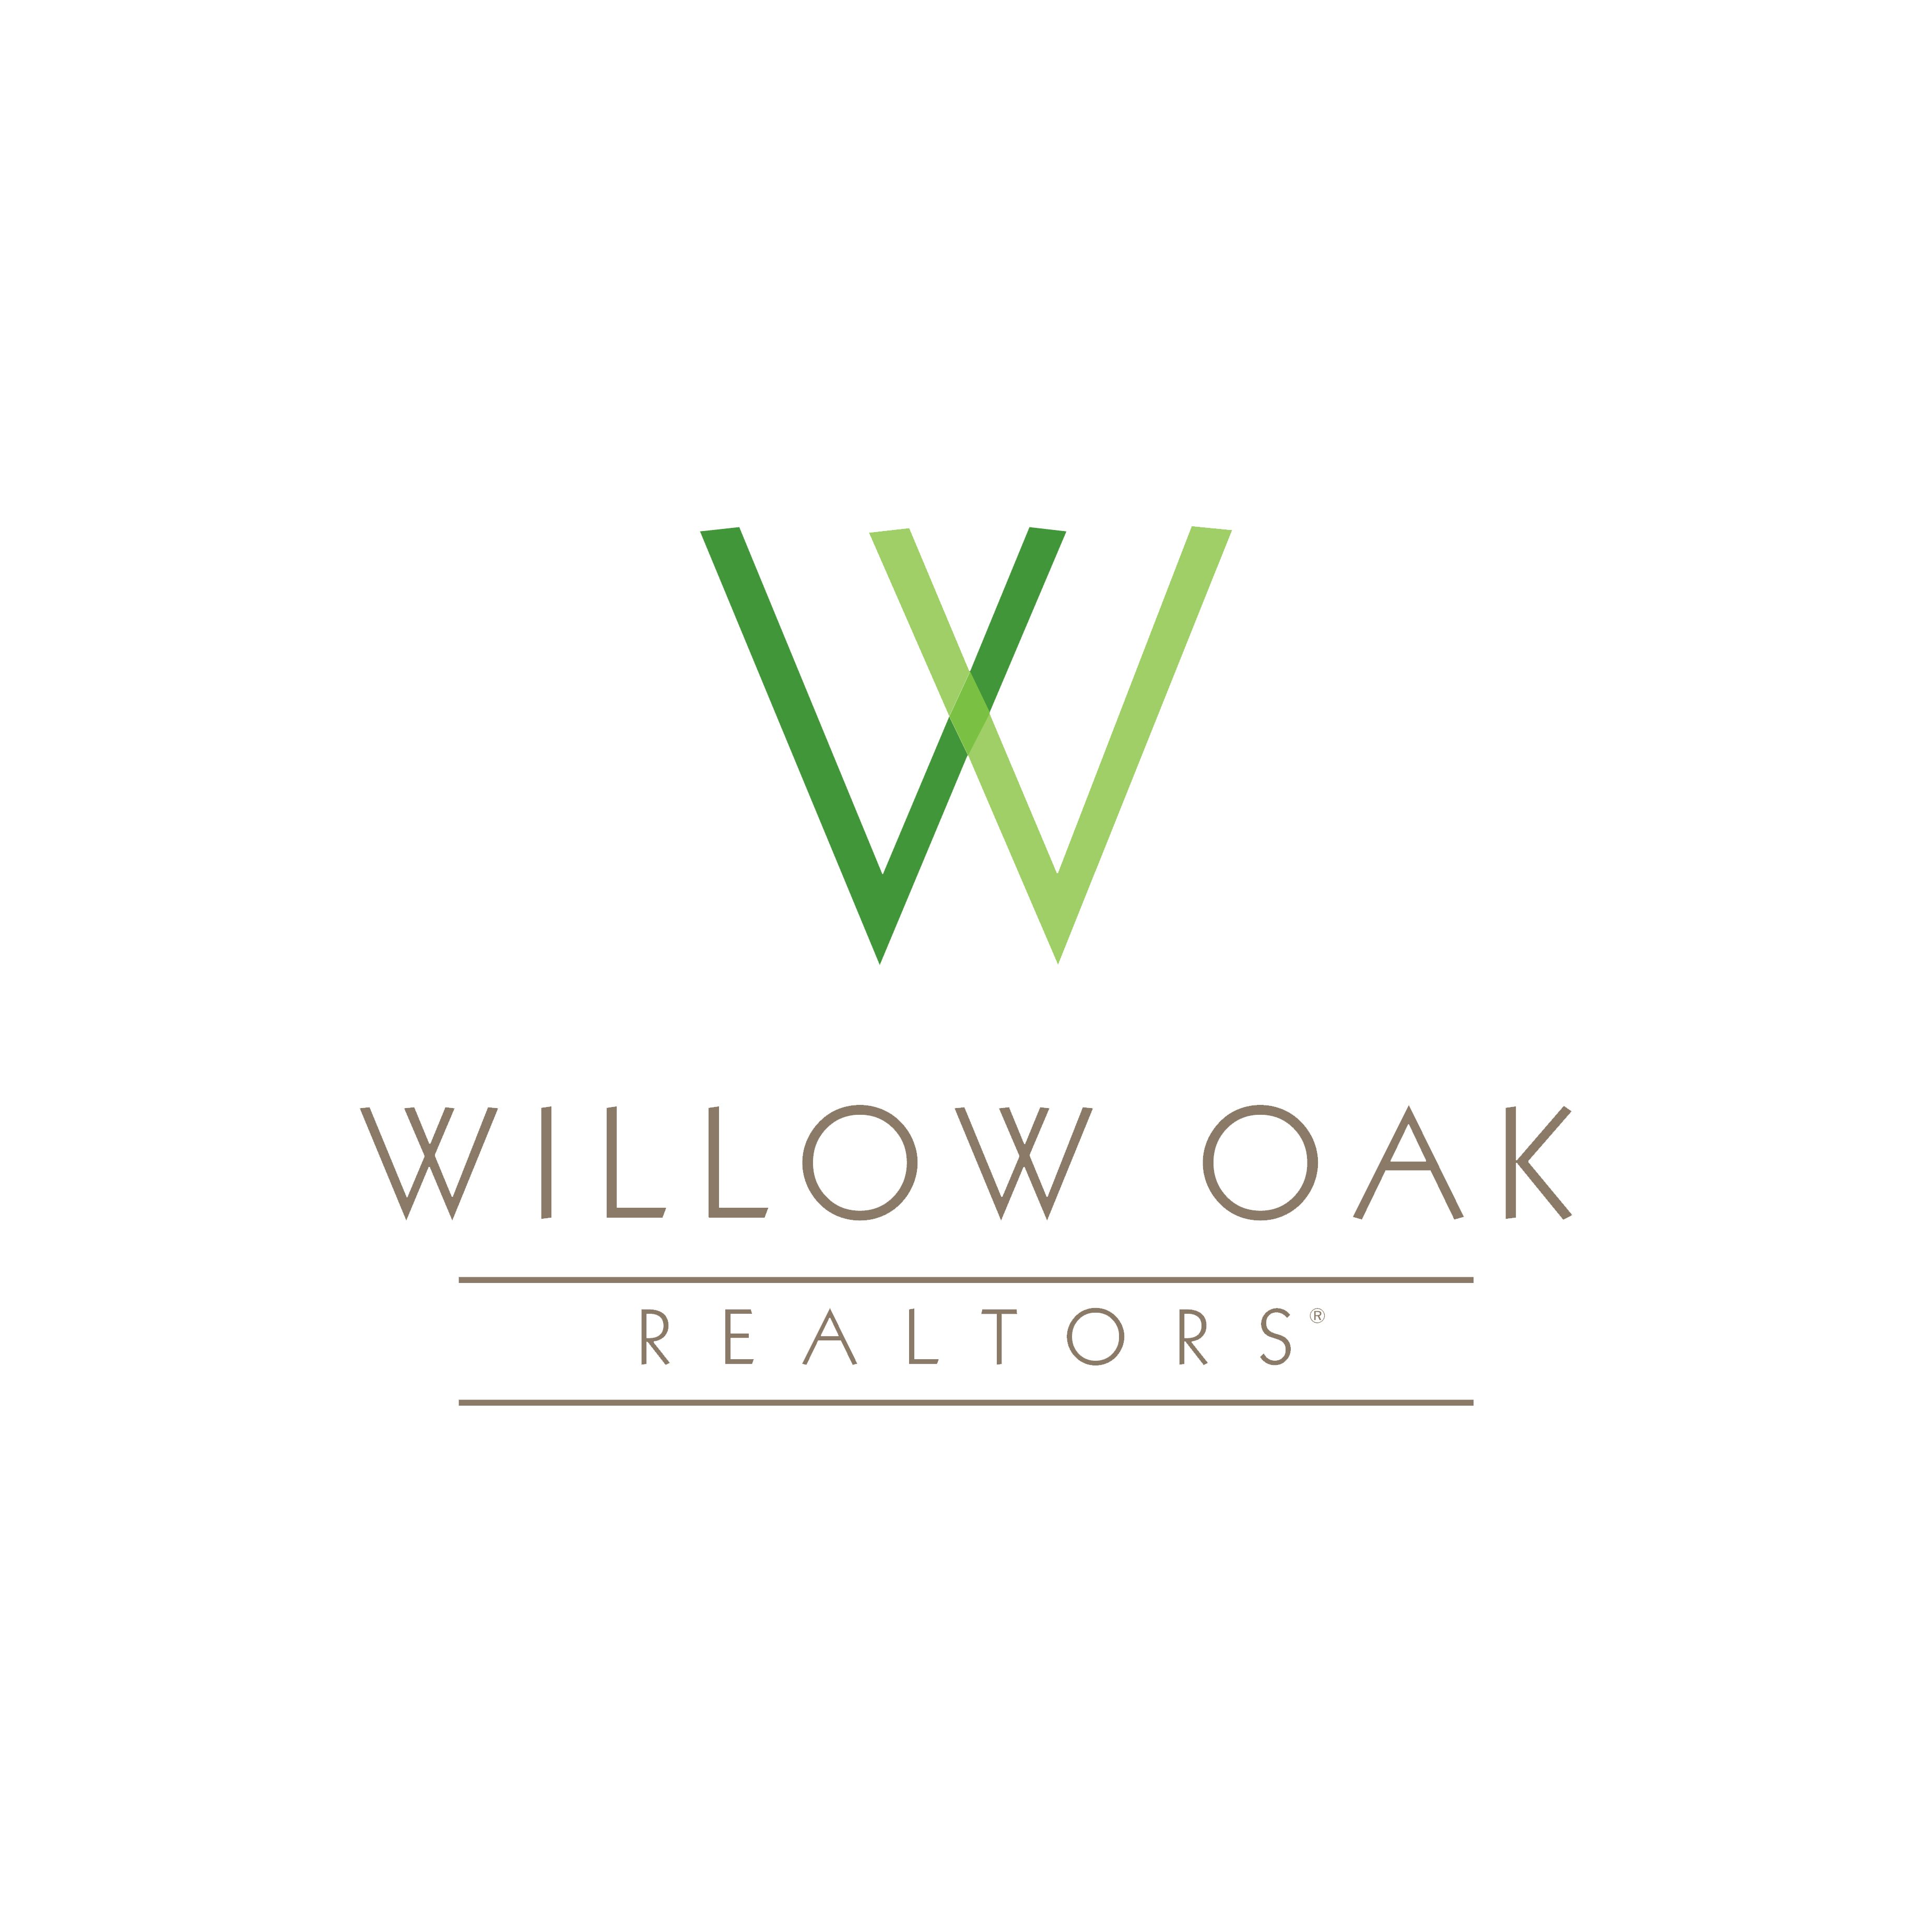 Trust our team of experienced agents at Willow Oak Realtors for all your real estate needs. We want to be your real estate advisors for life.